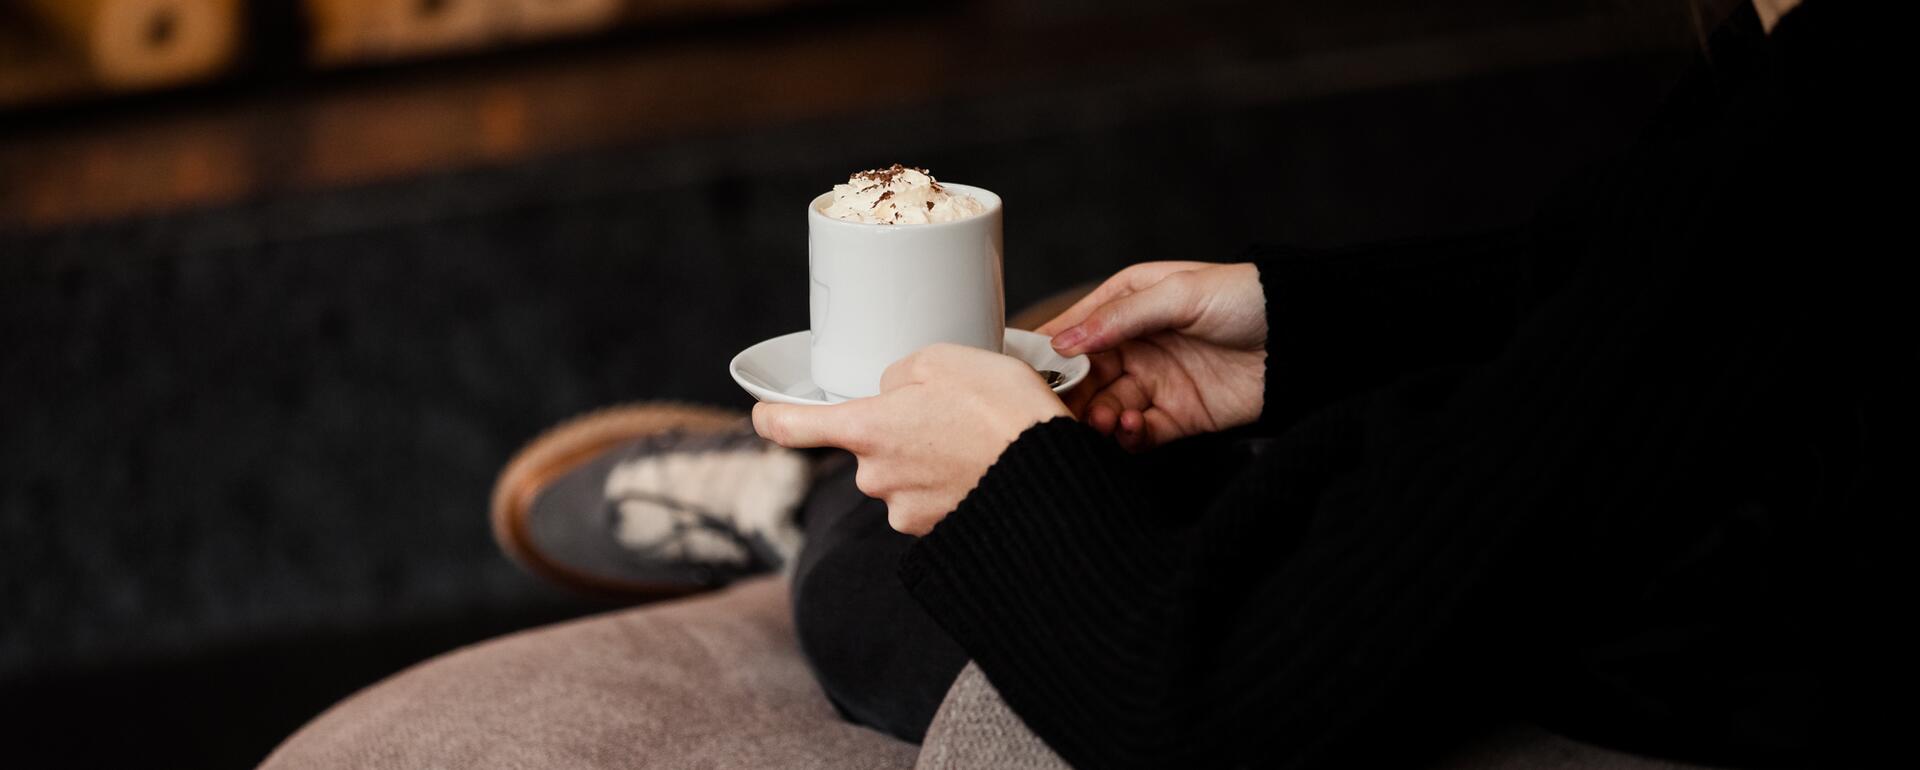 hot chocolate by the fireplace